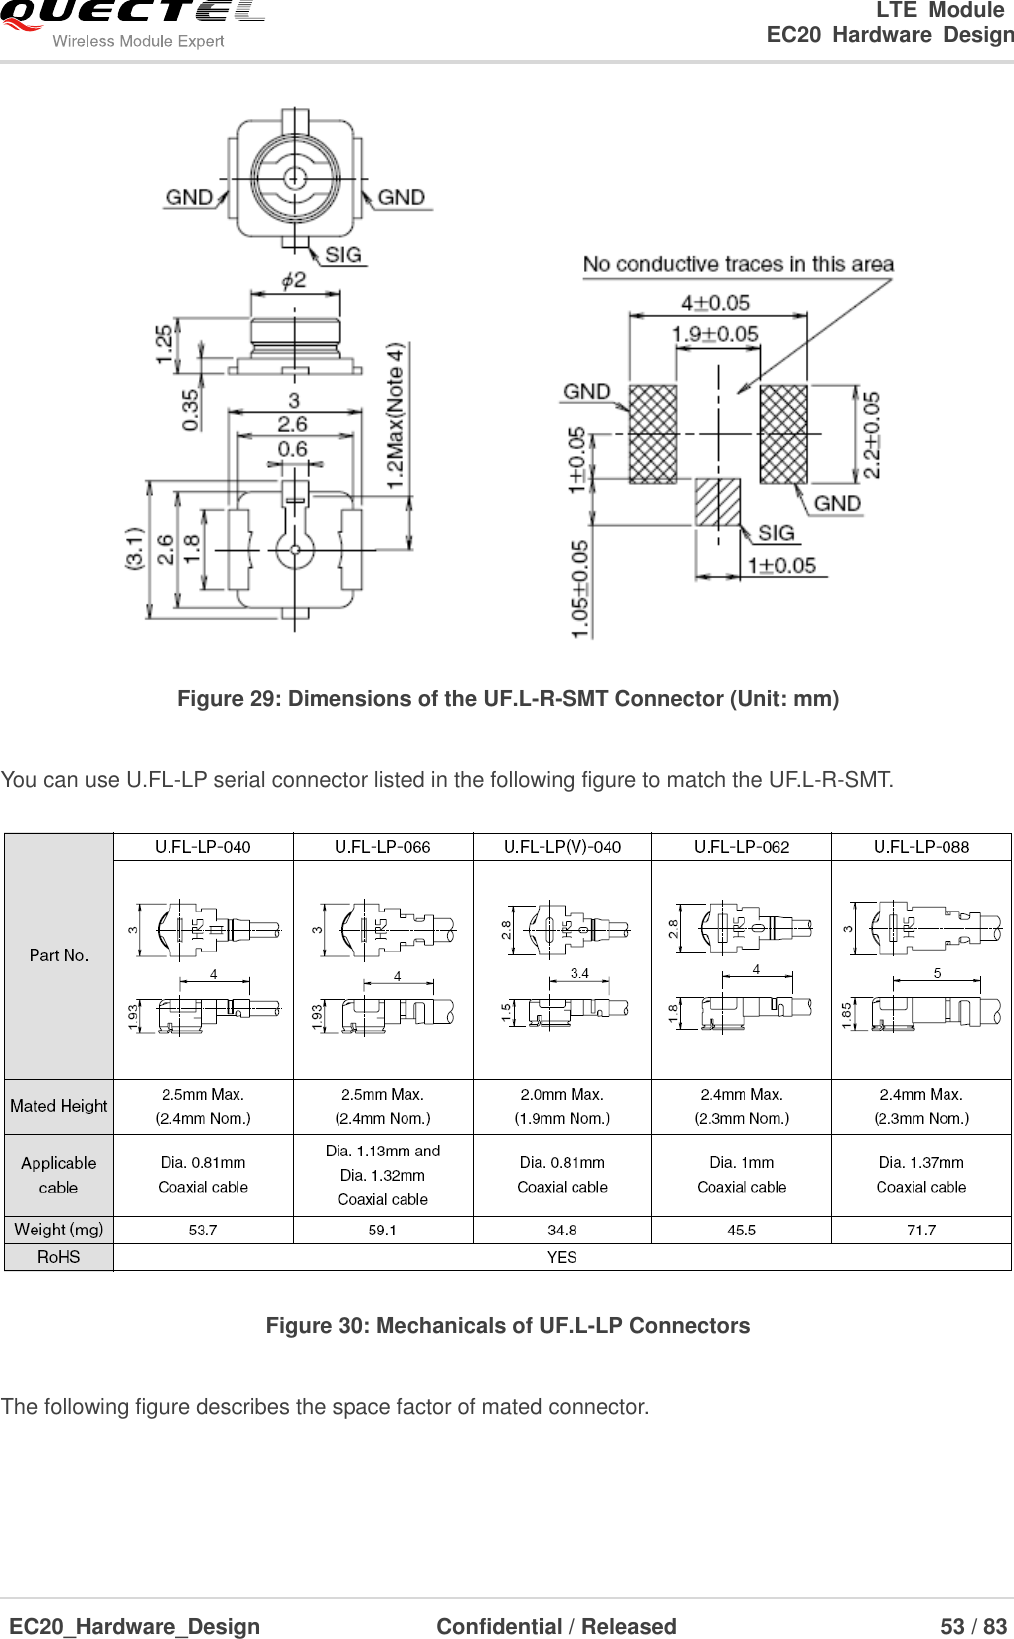                                                                        LTE  Module                                                                   EC20  Hardware  Design  EC20_Hardware_Design                  Confidential / Released                            53 / 83      Figure 29: Dimensions of the UF.L-R-SMT Connector (Unit: mm)  You can use U.FL-LP serial connector listed in the following figure to match the UF.L-R-SMT.  Figure 30: Mechanicals of UF.L-LP Connectors  The following figure describes the space factor of mated connector. 